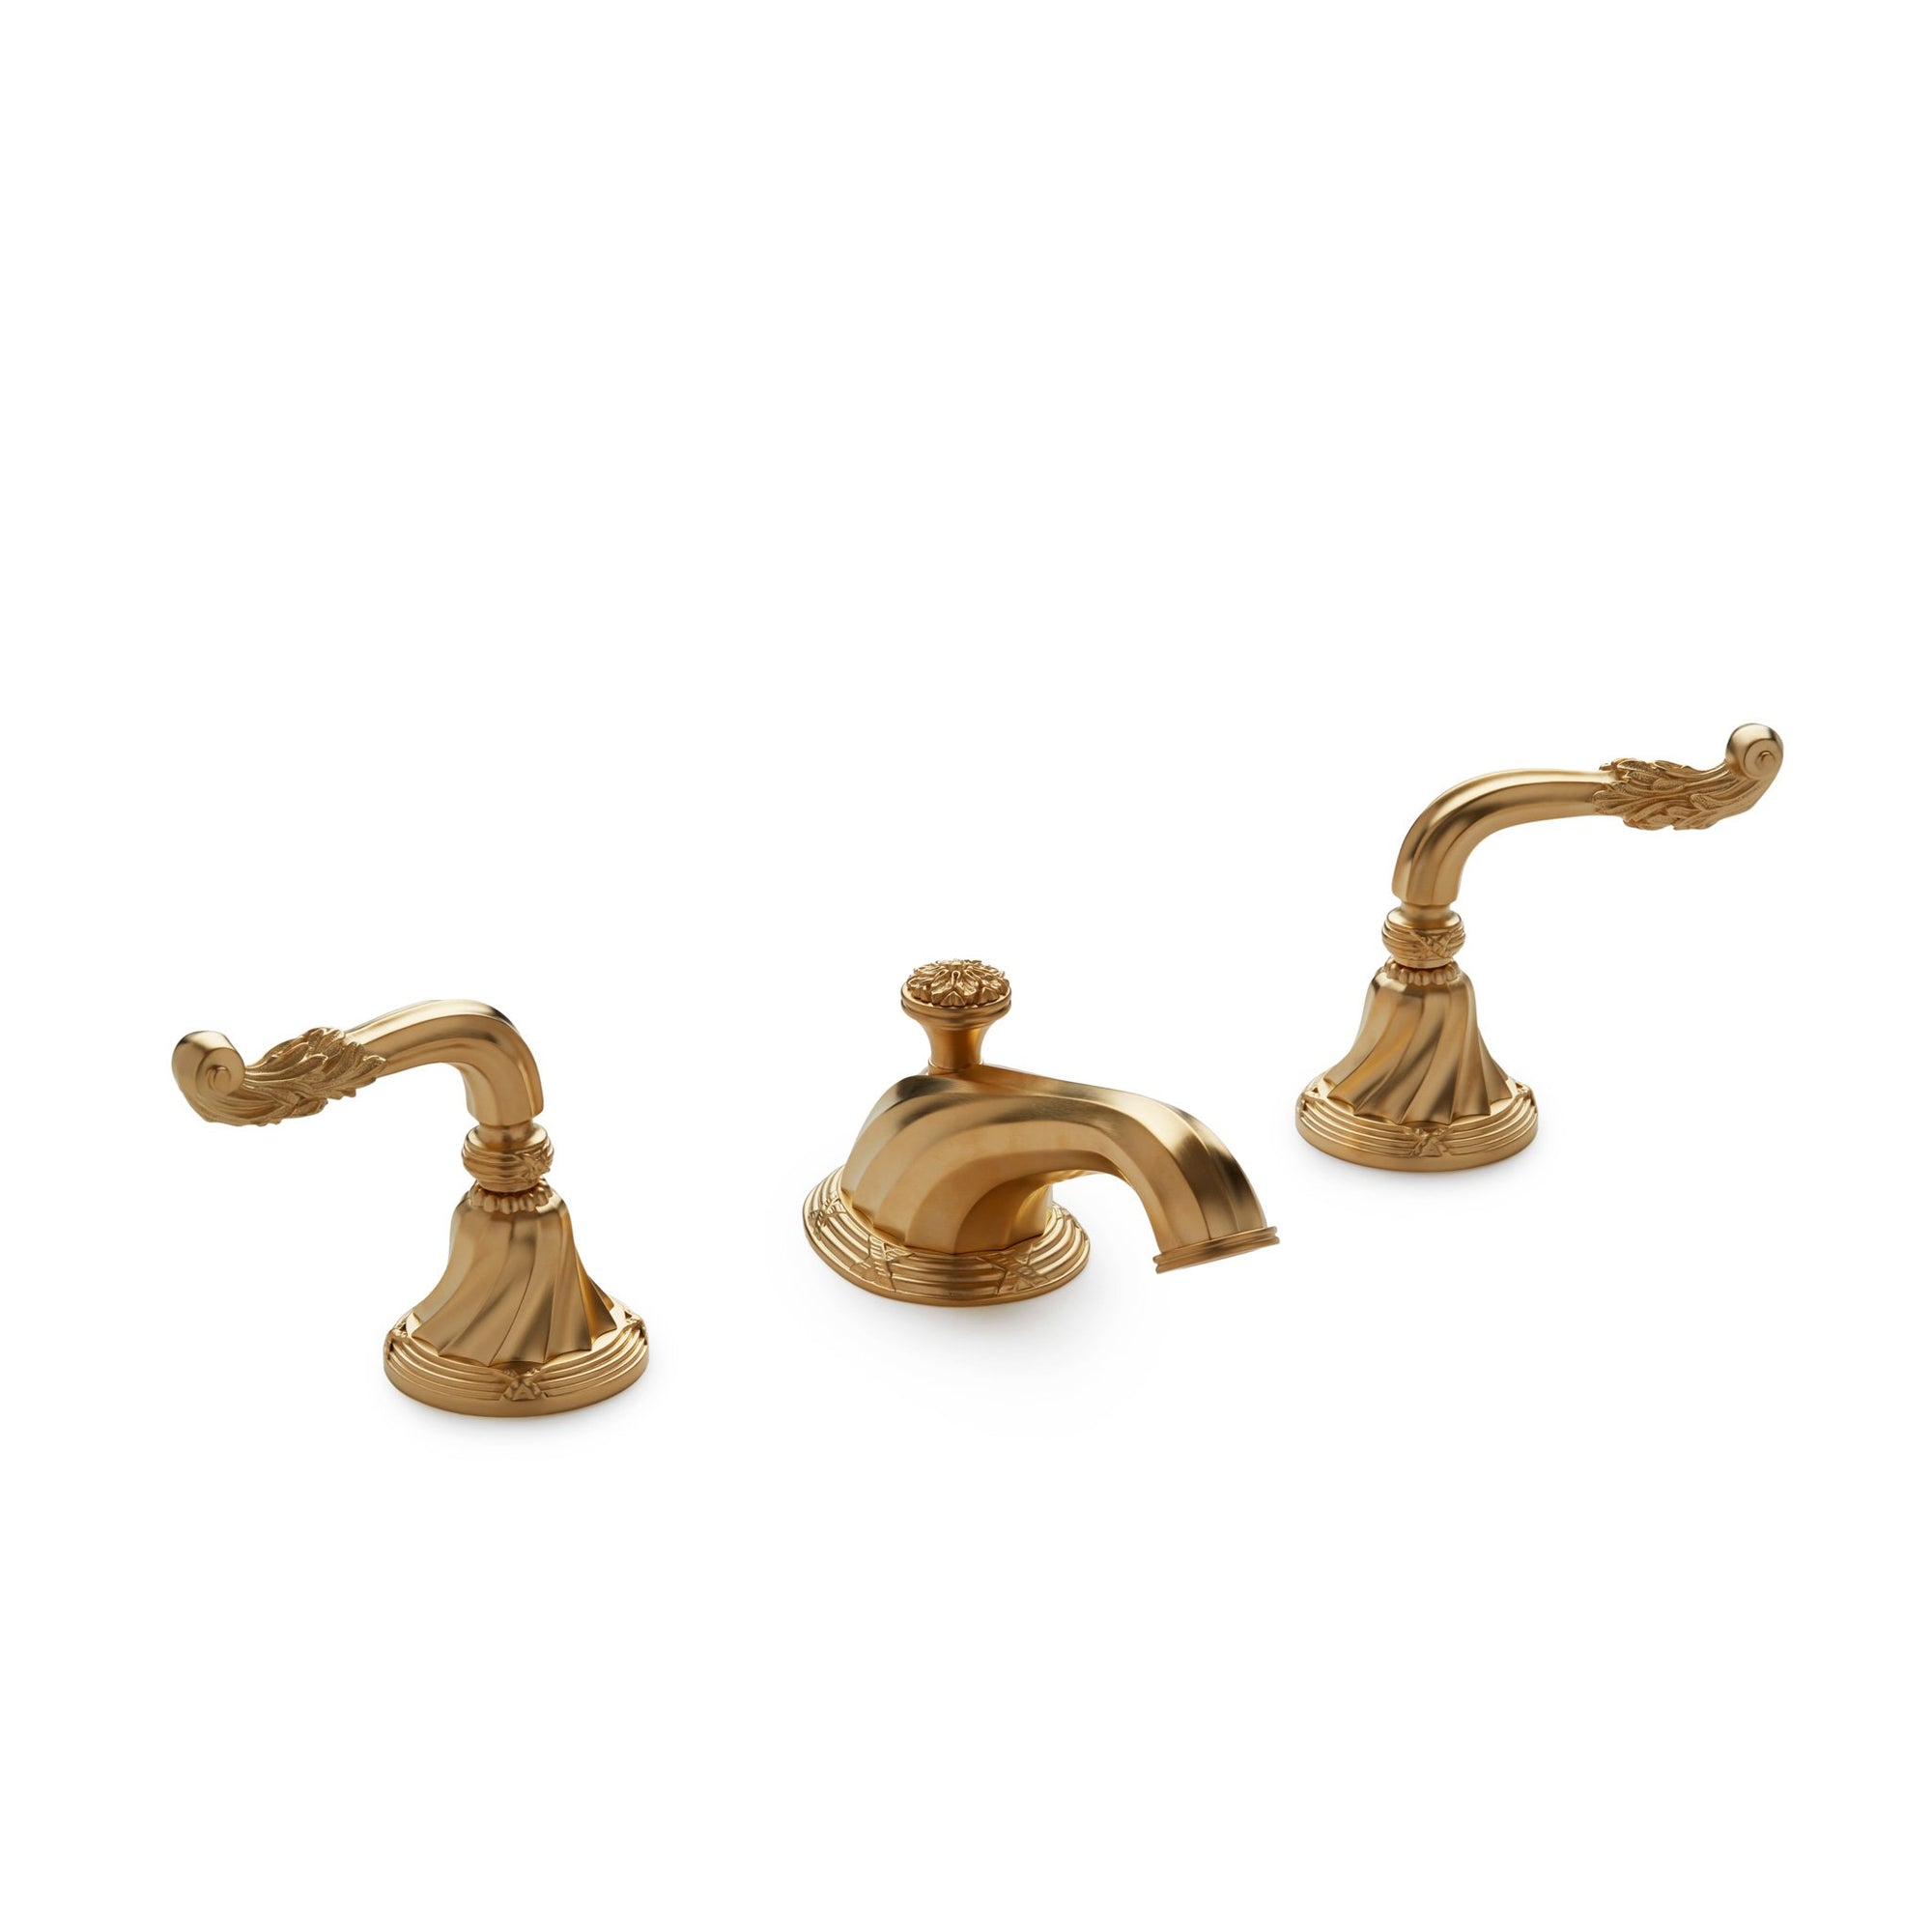 0912BSN-GP Sherle Wagner International Ribbon & Reed Lever Faucet Set in Gold Plate metal finish